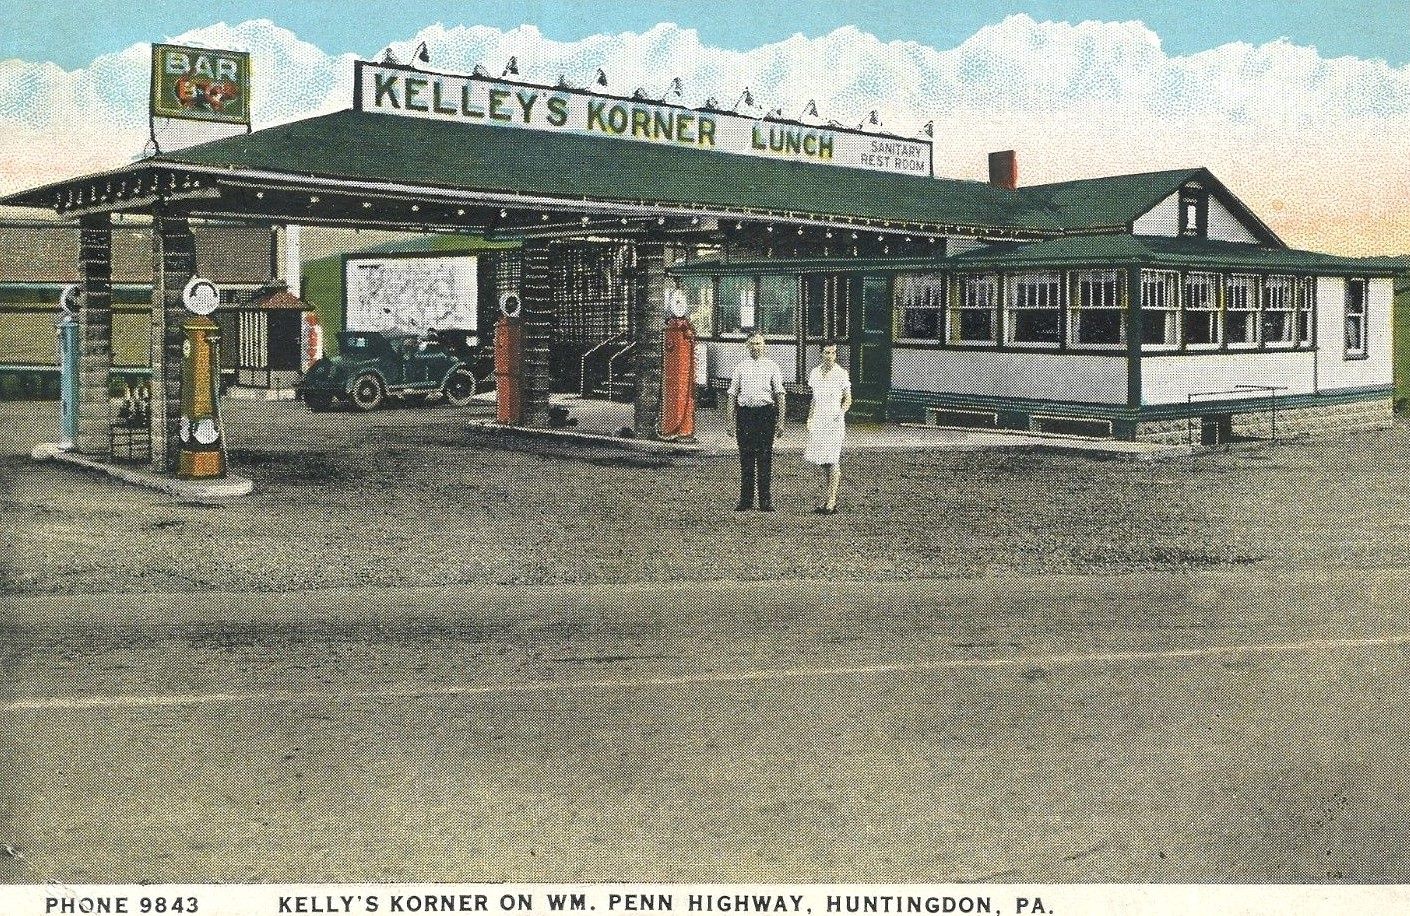 Kelley's Korner Lunch and Gas Station located on the William Penn Highway in Huntingdon in 1938